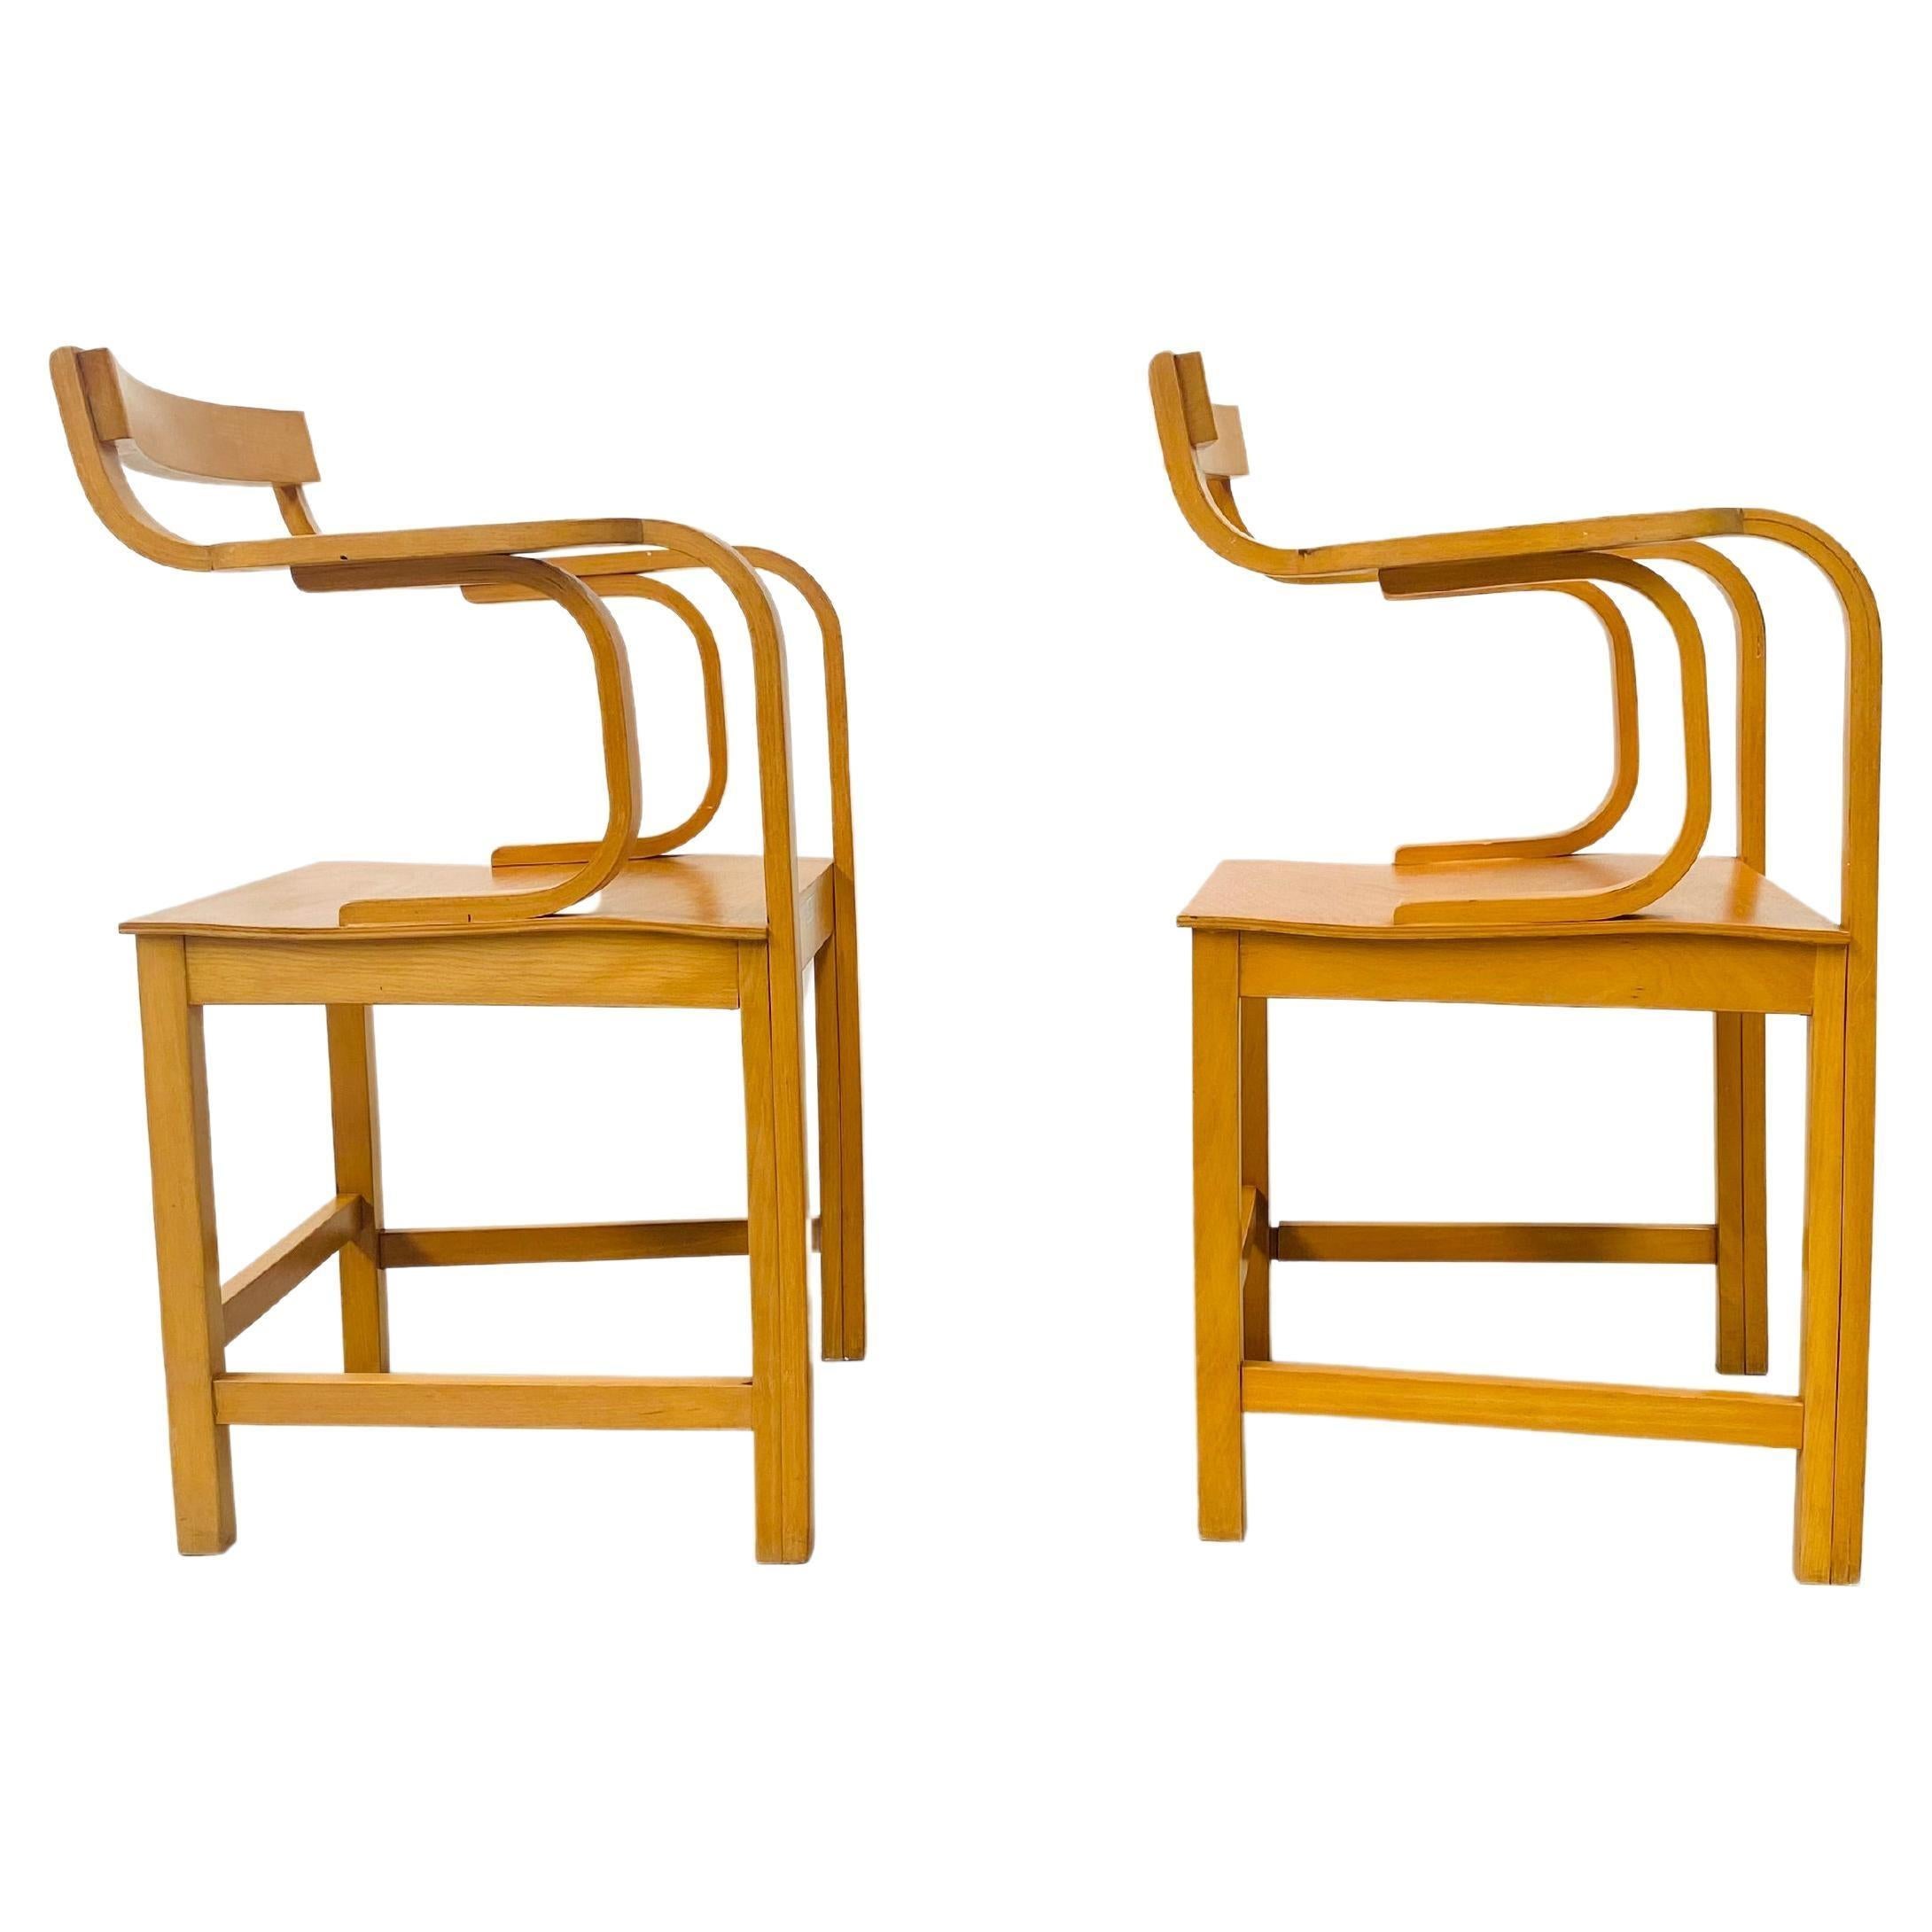 Vintage Dutch Plywood Beech Armchairs by Enraf Nonius Delft, 1970s For Sale 2